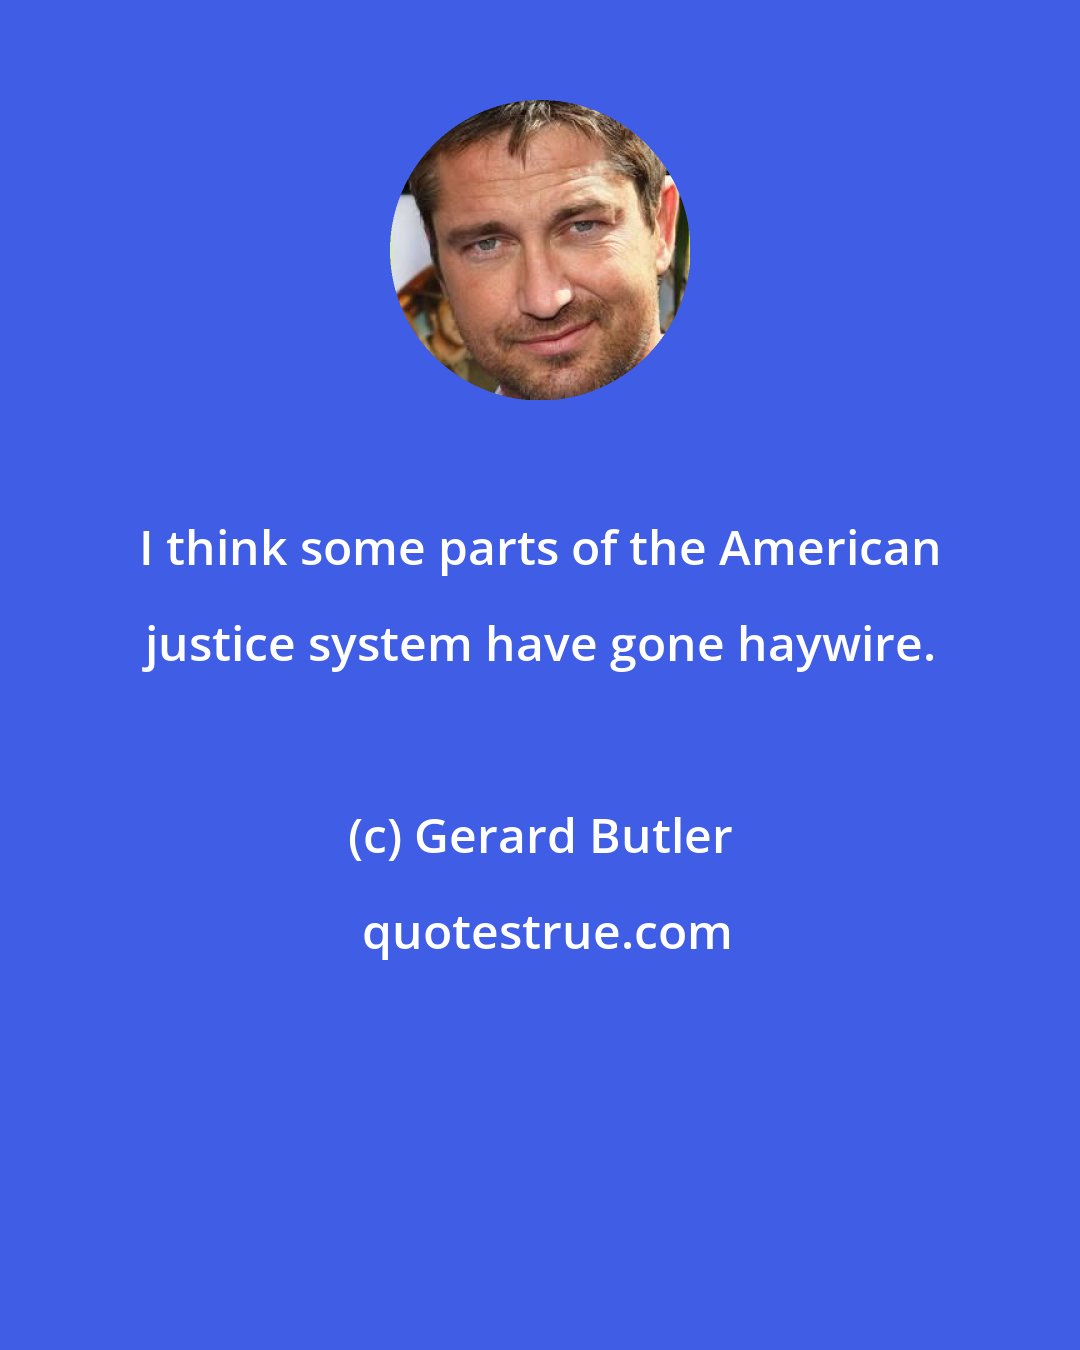 Gerard Butler: I think some parts of the American justice system have gone haywire.